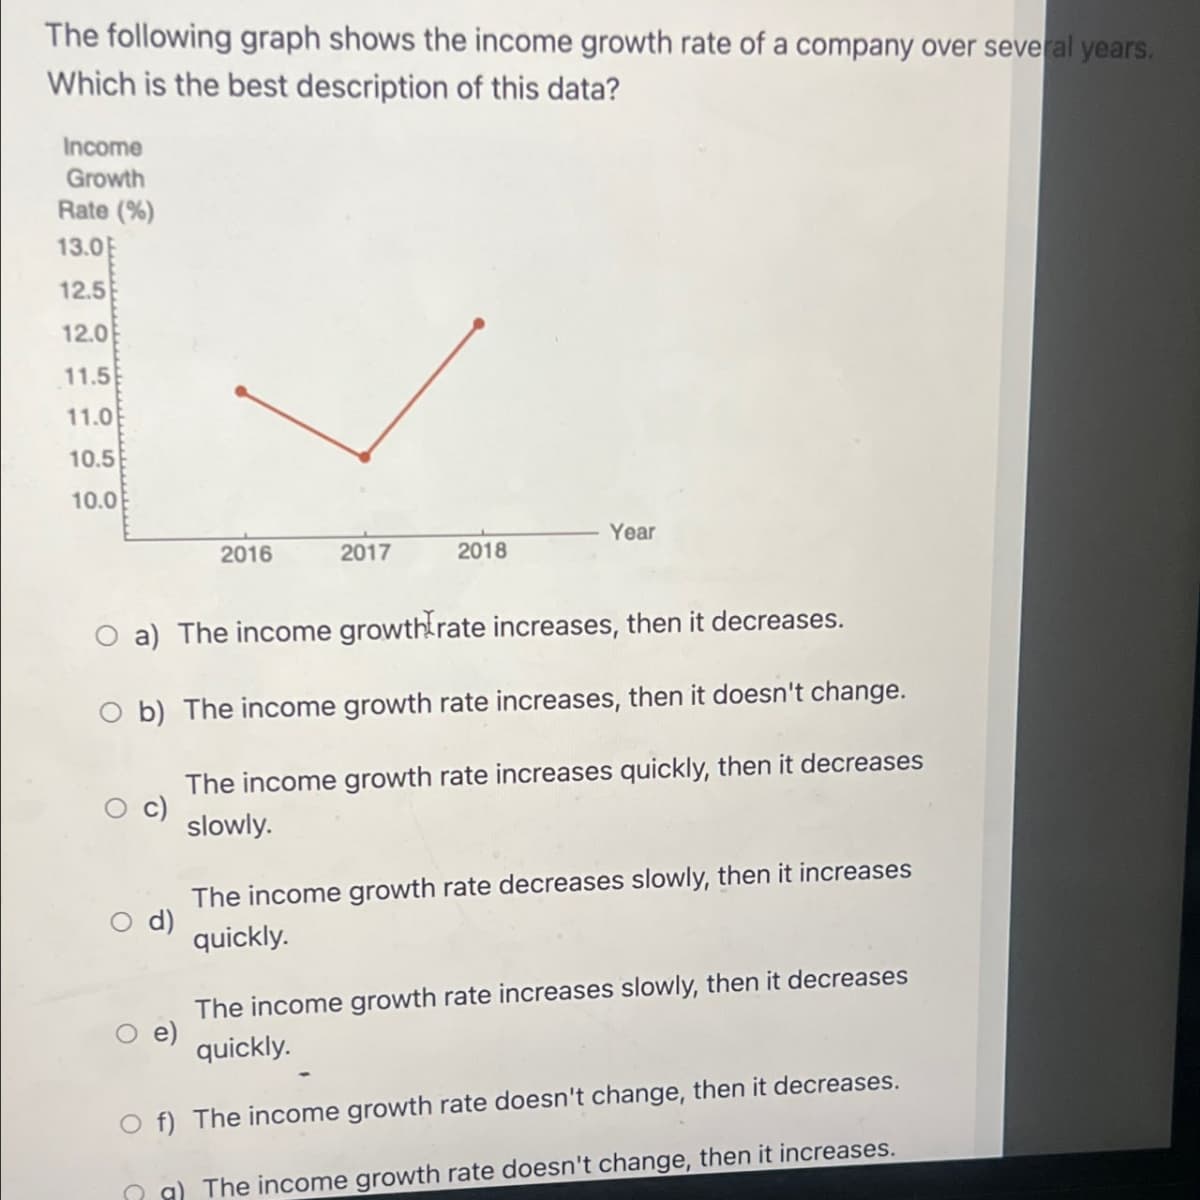 The following graph shows the income growth rate of a company over several years.
Which is the best description of this data?
Income
Growth
Rate (%)
13.0
12.5
12.0
11.5
11.0
10.5
10.0
Year
2016
2017
2018
O a) The income growth rate increases, then it decreases.
O b) The income growth rate increases, then it doesn't change.
The income growth rate increases quickly, then it decreases
slowly.
The income growth rate decreases slowly, then it increases
O d)
quickly.
e)
The income growth rate increases slowly, then it decreases
quickly.
Of) The income growth rate doesn't change, then it decreases.
g) The income growth rate doesn't change, then it increases.